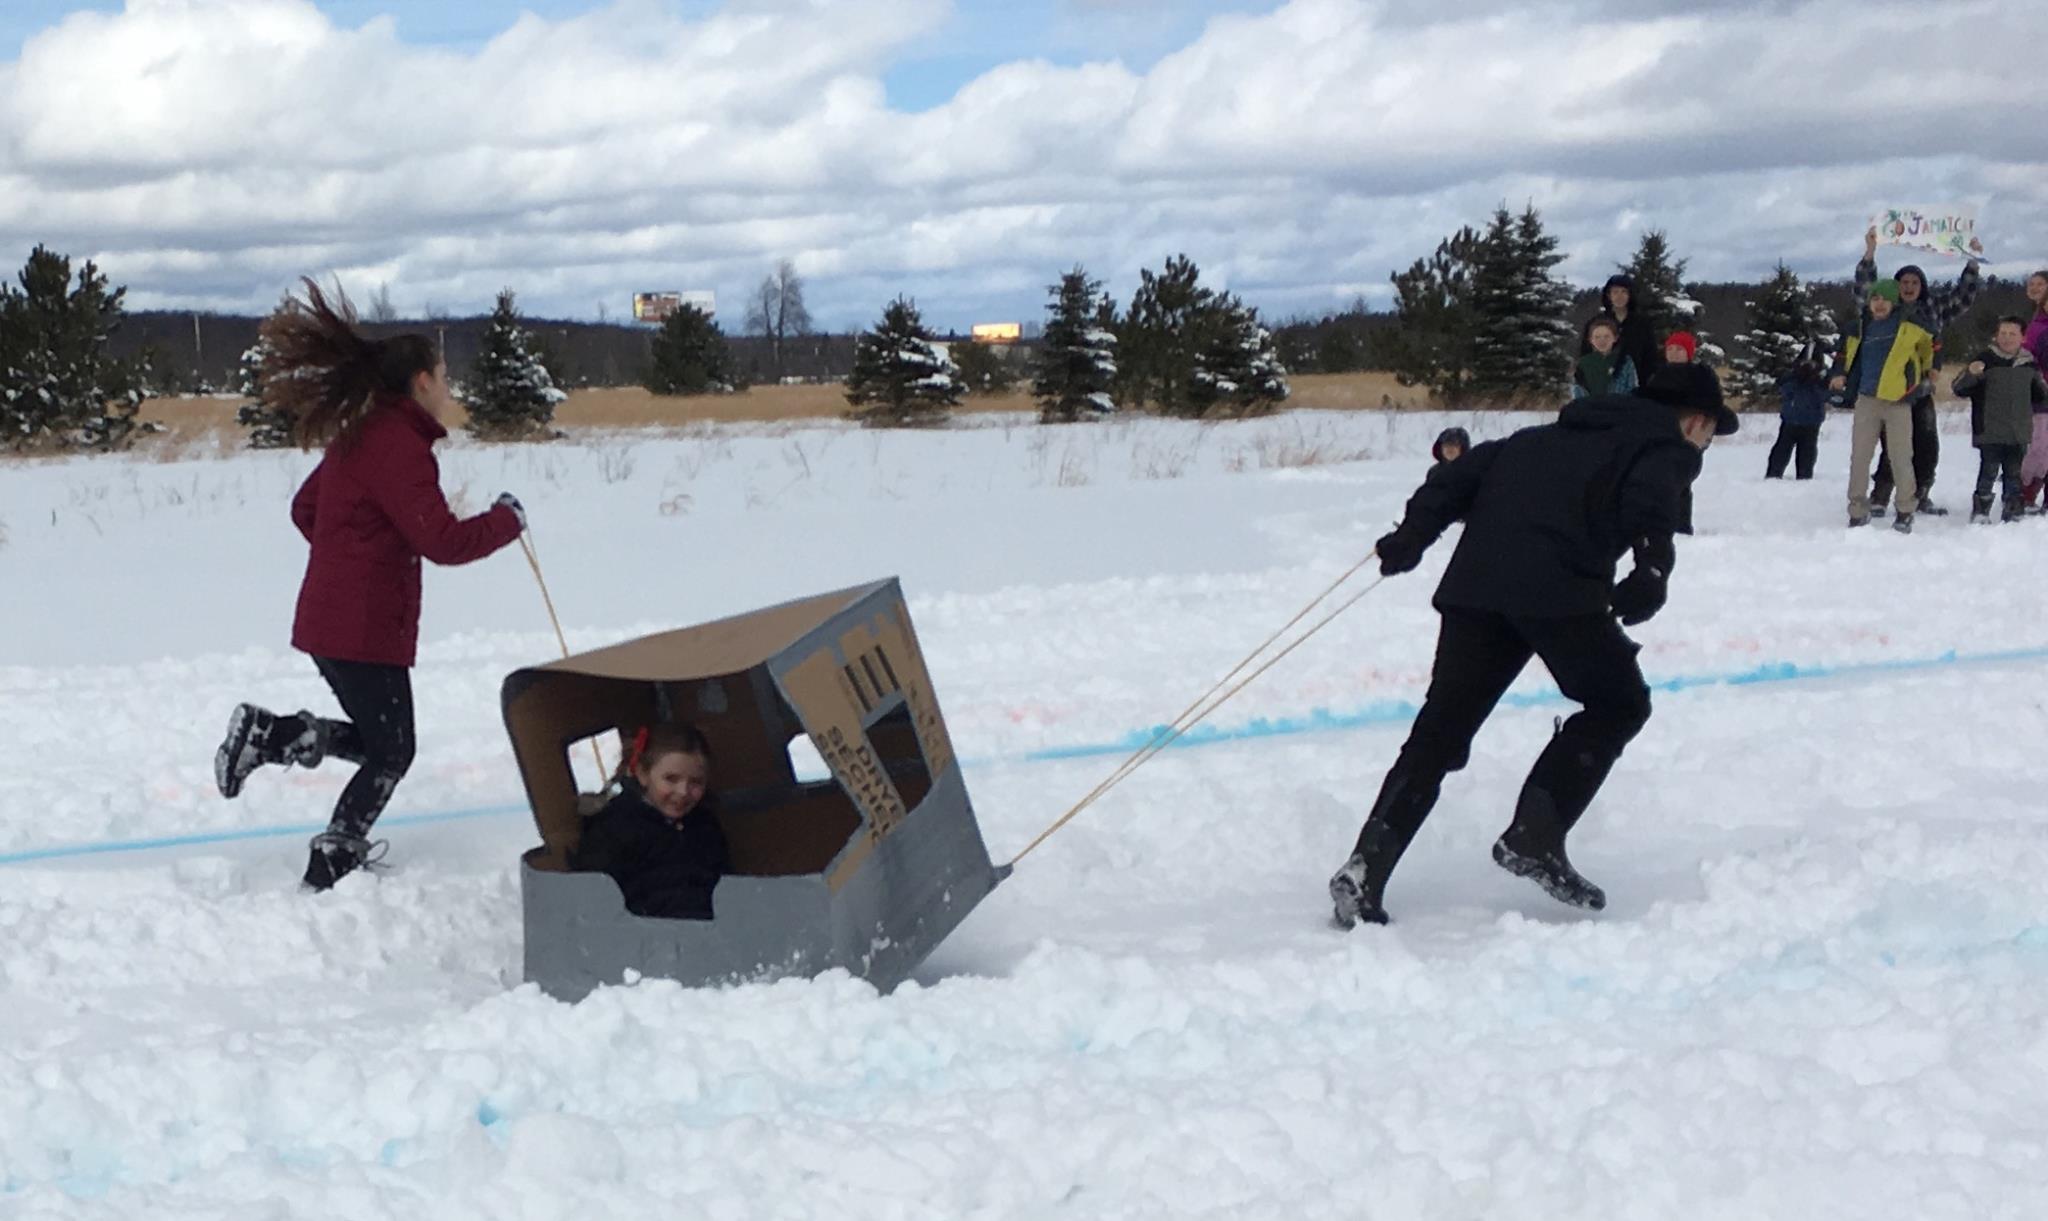 Students participating in a cardboard sled race.